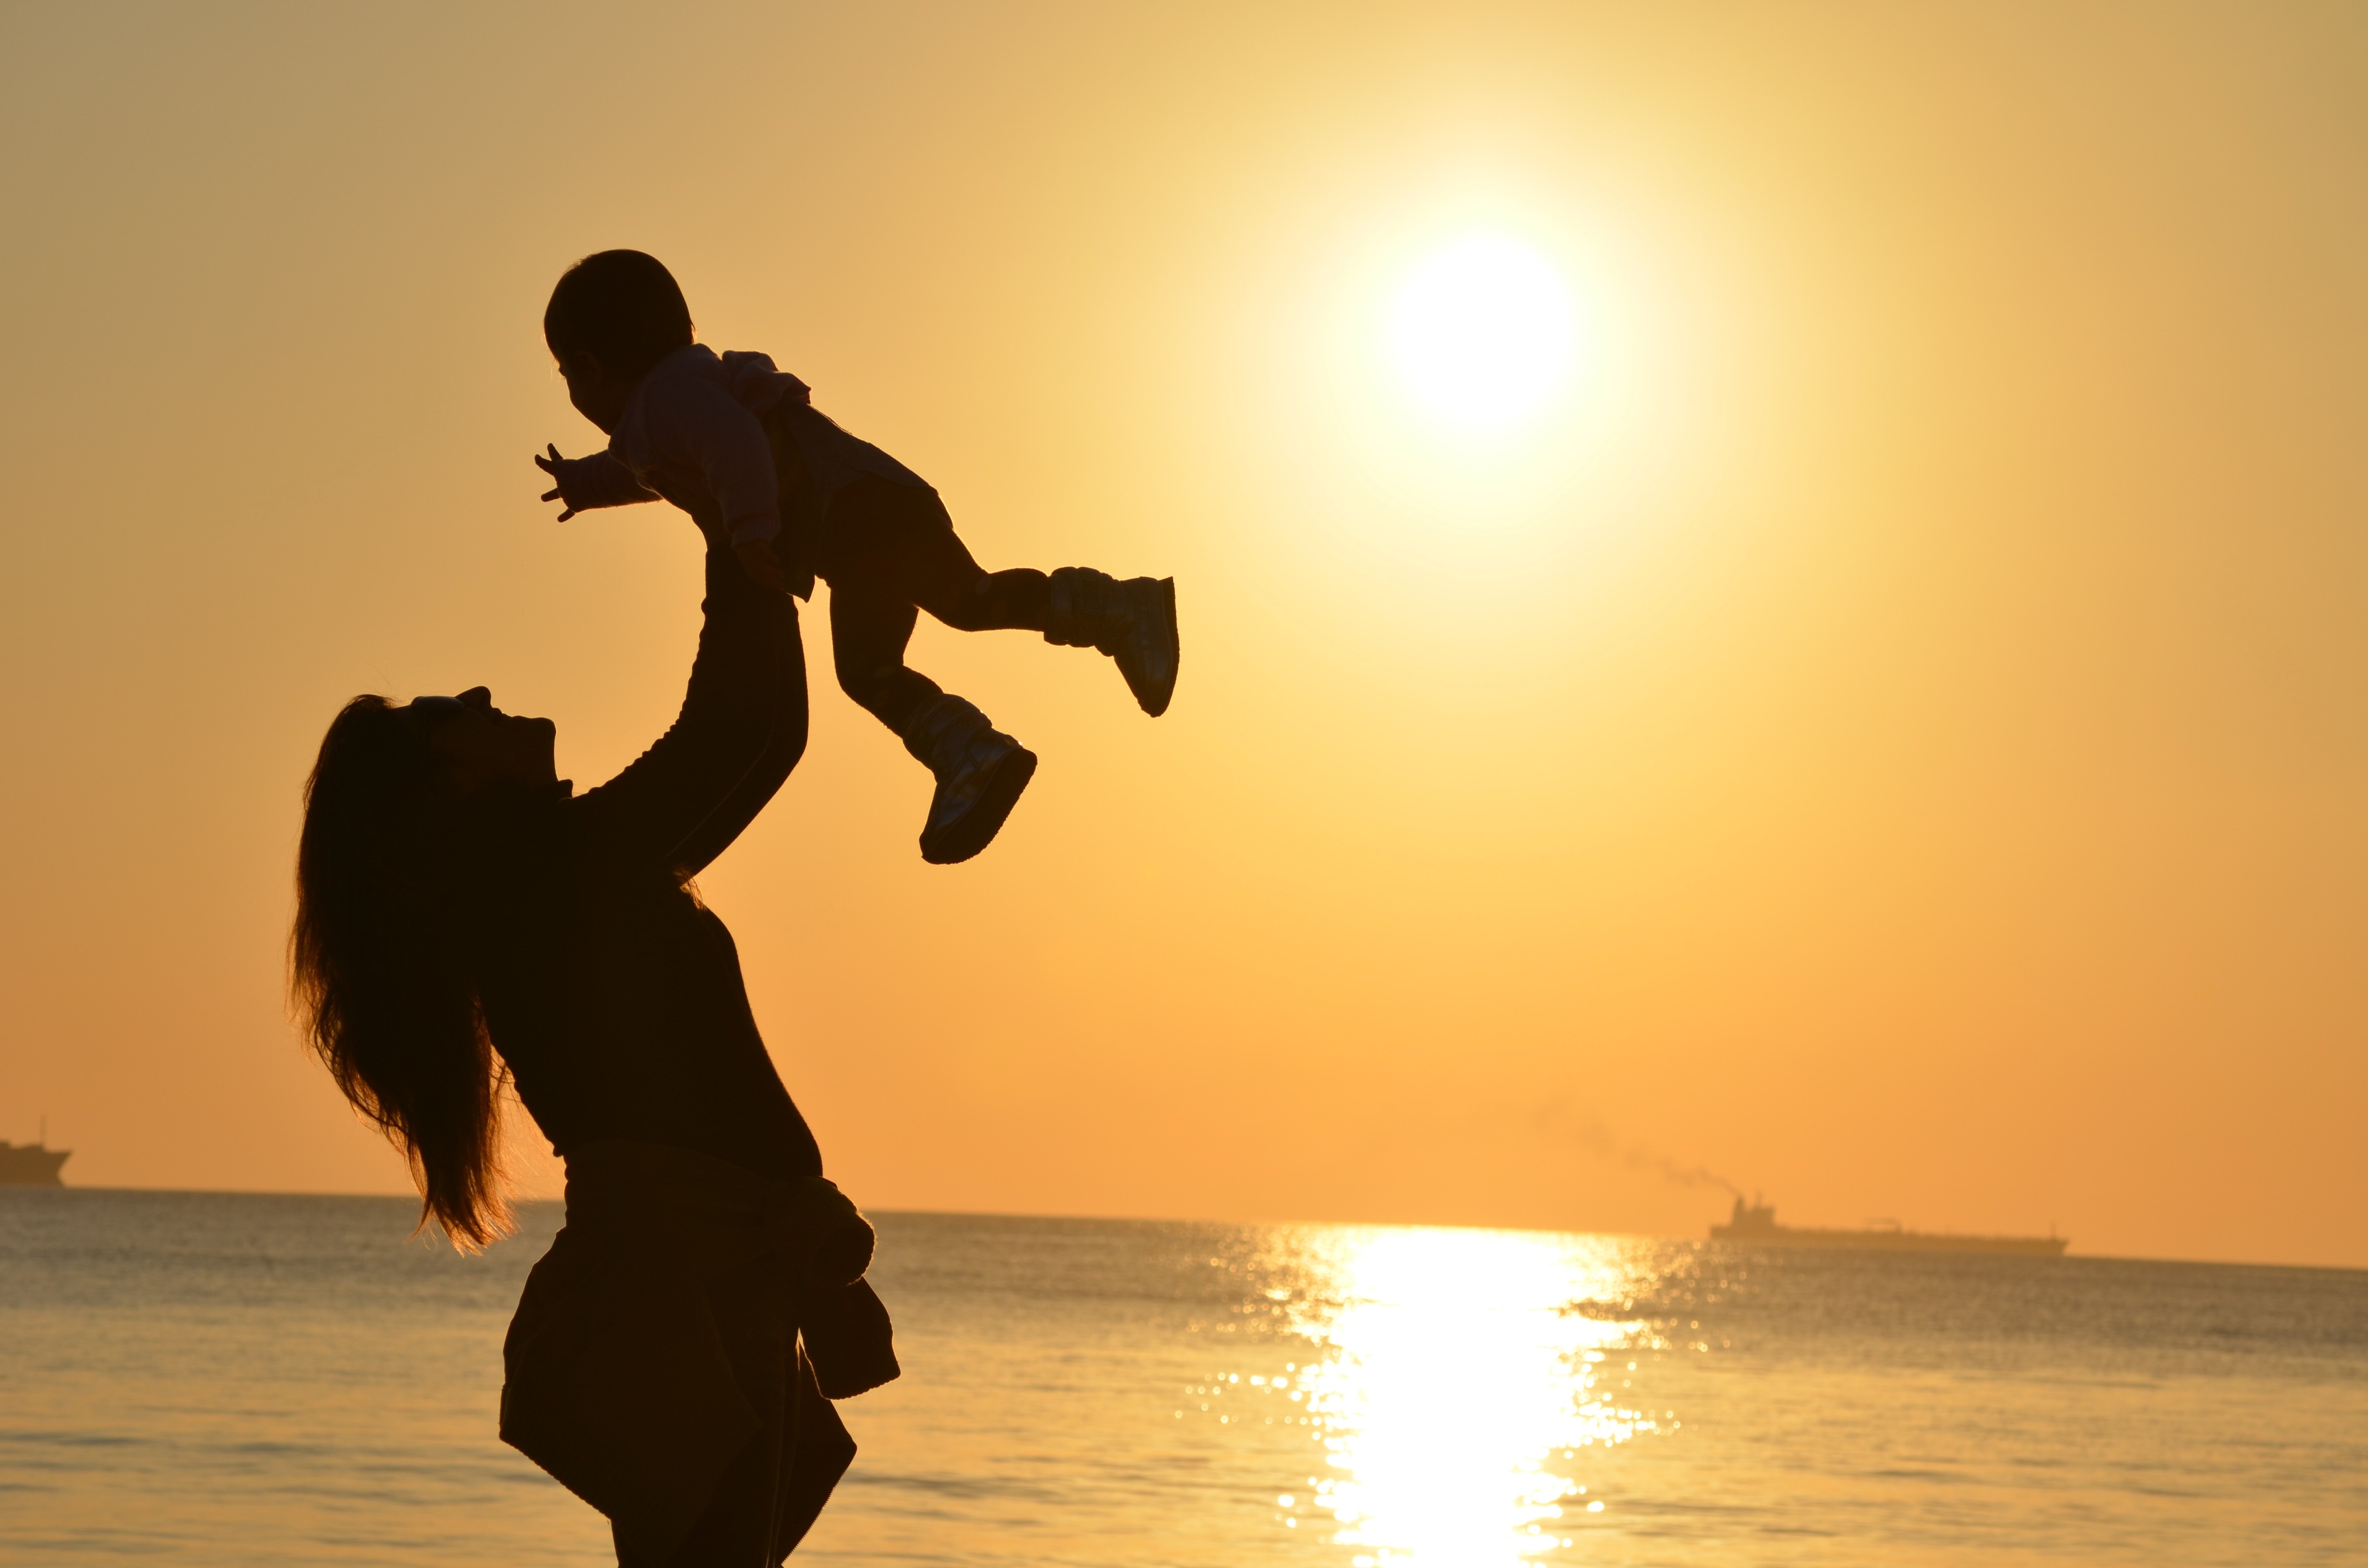 Photograph of the silhouette of a mother holding her child at the beach